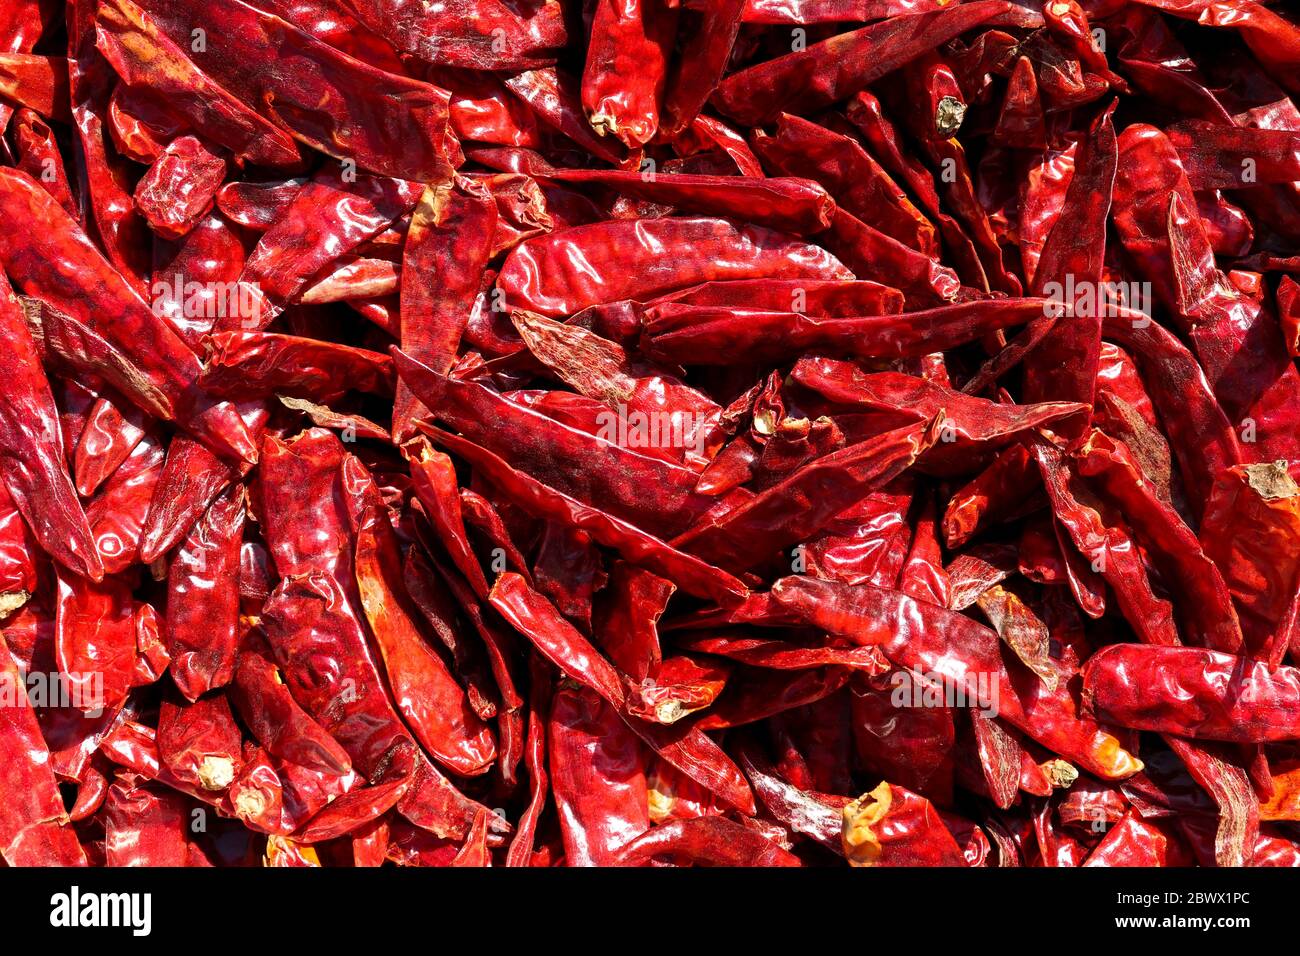 Pile of dried hot red chilies or chilli cayenne pepper. Stock Photo